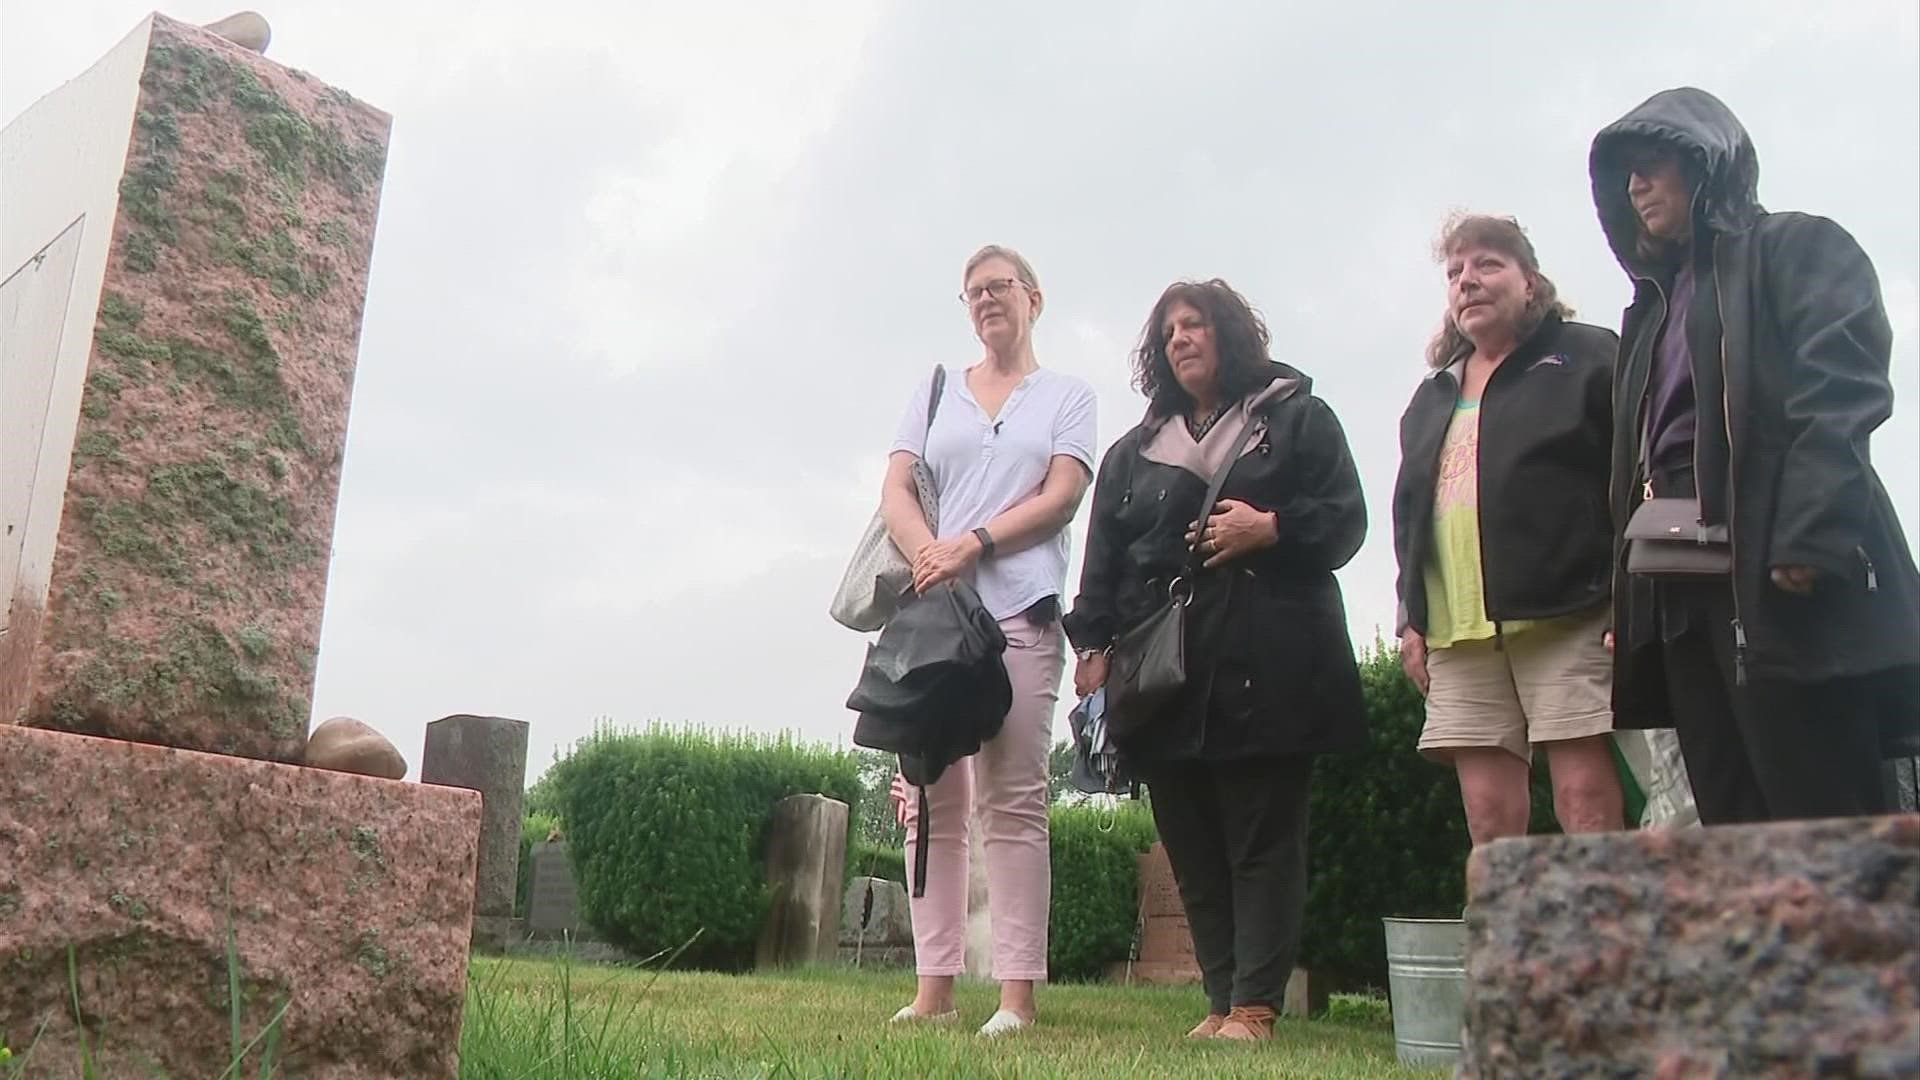 Lori Nesson's cold case went unsolved for 46 years. Lori's sister, Toni Hastings, returned to her gravesite to let her know police finally identified her killers.